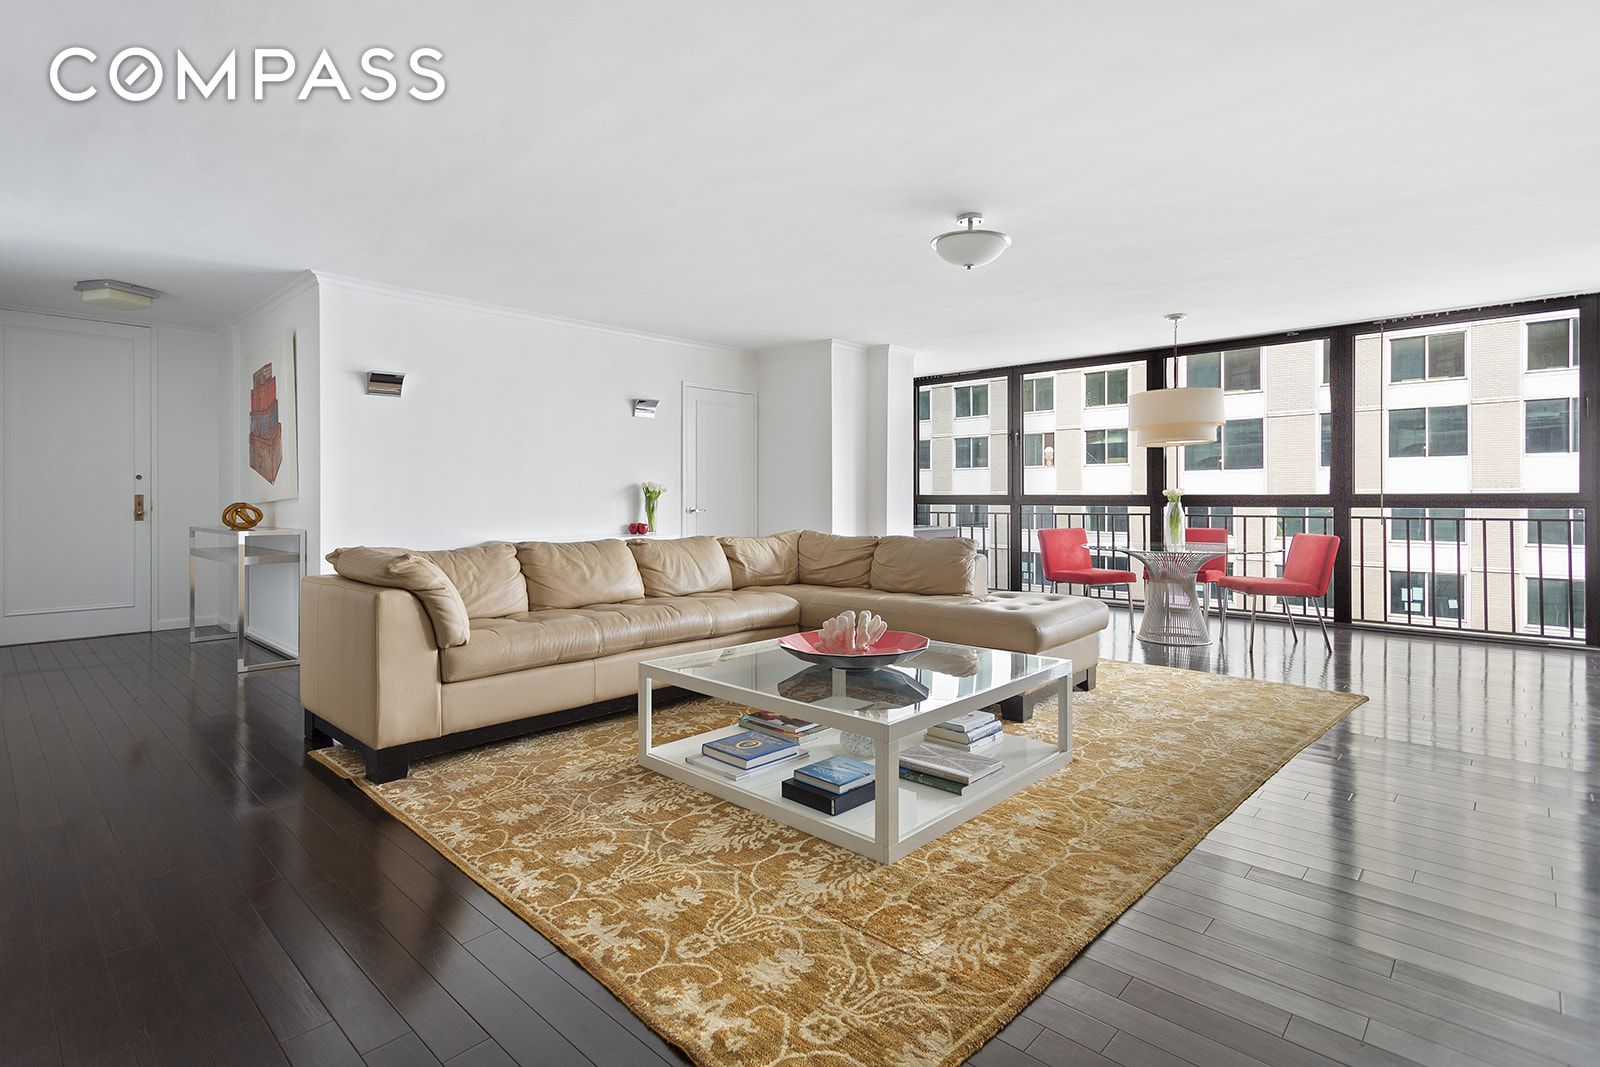 112 West 56th Street 24N, Theater District, Midtown West, NYC - 2 Bedrooms  
2.5 Bathrooms  
5 Rooms - 